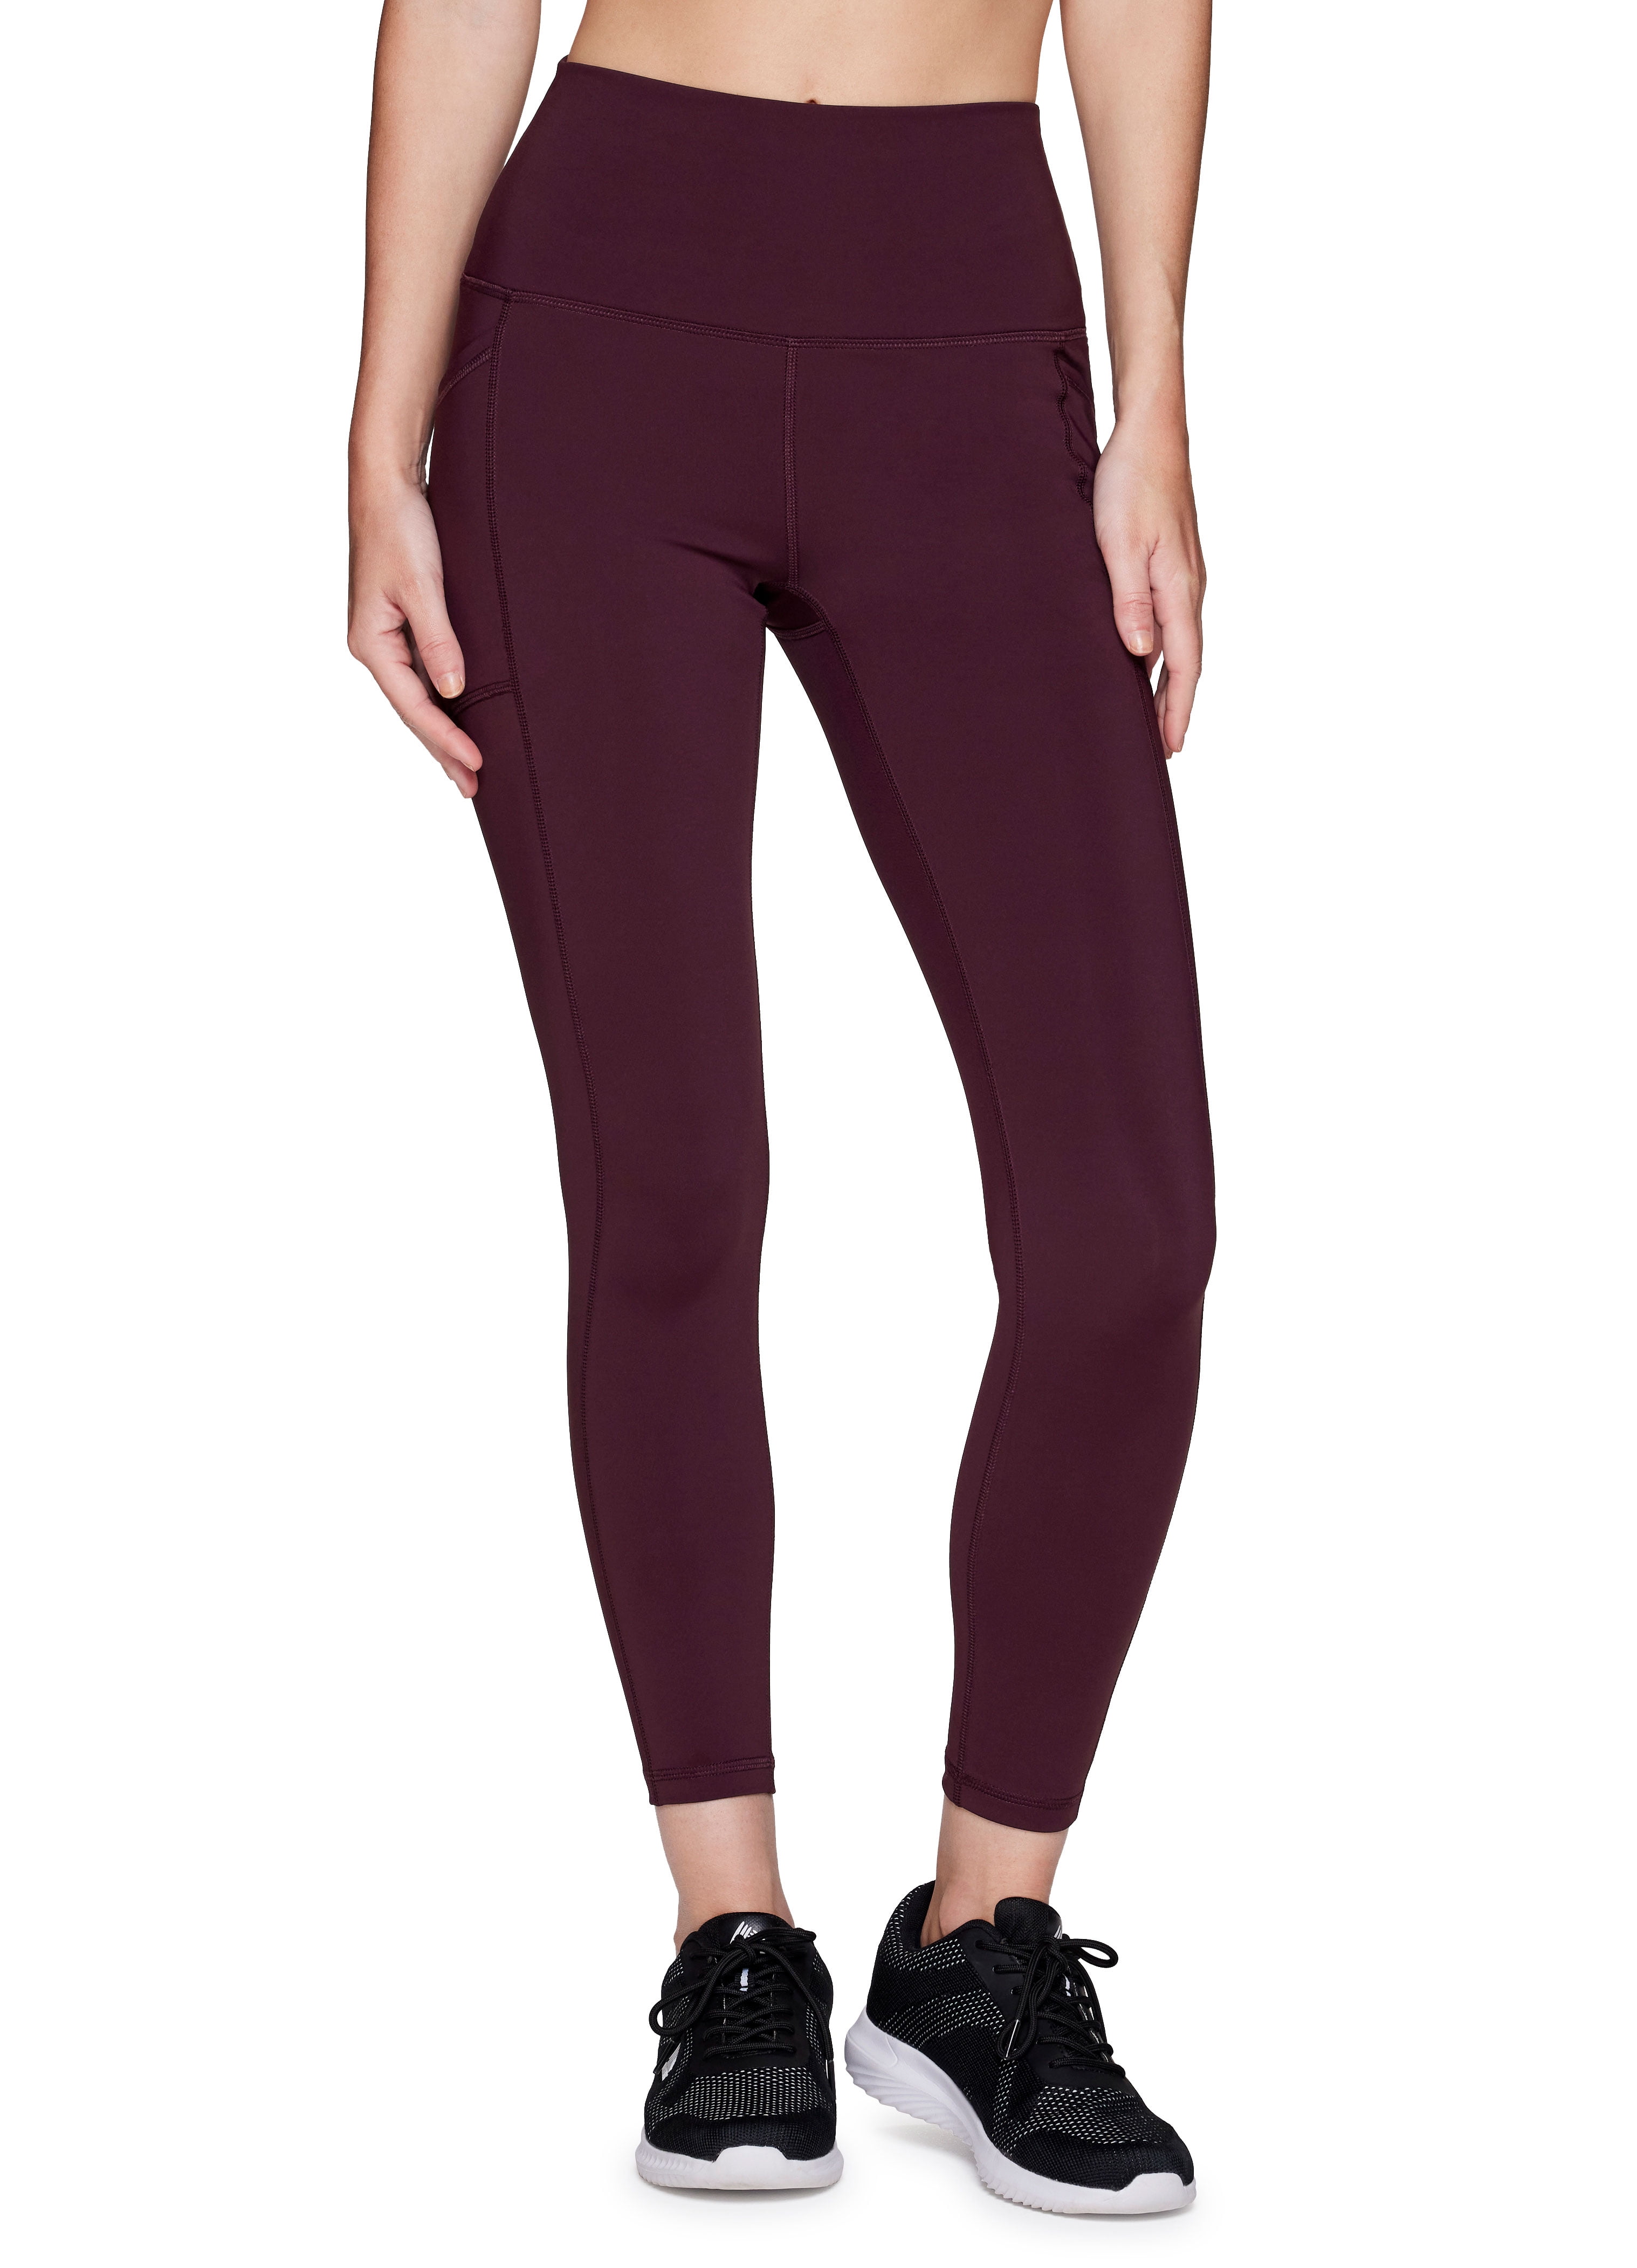 Rbx Active RBX Workout Leggings Multi Size M - $10 (68% Off Retail) - From  Hailey